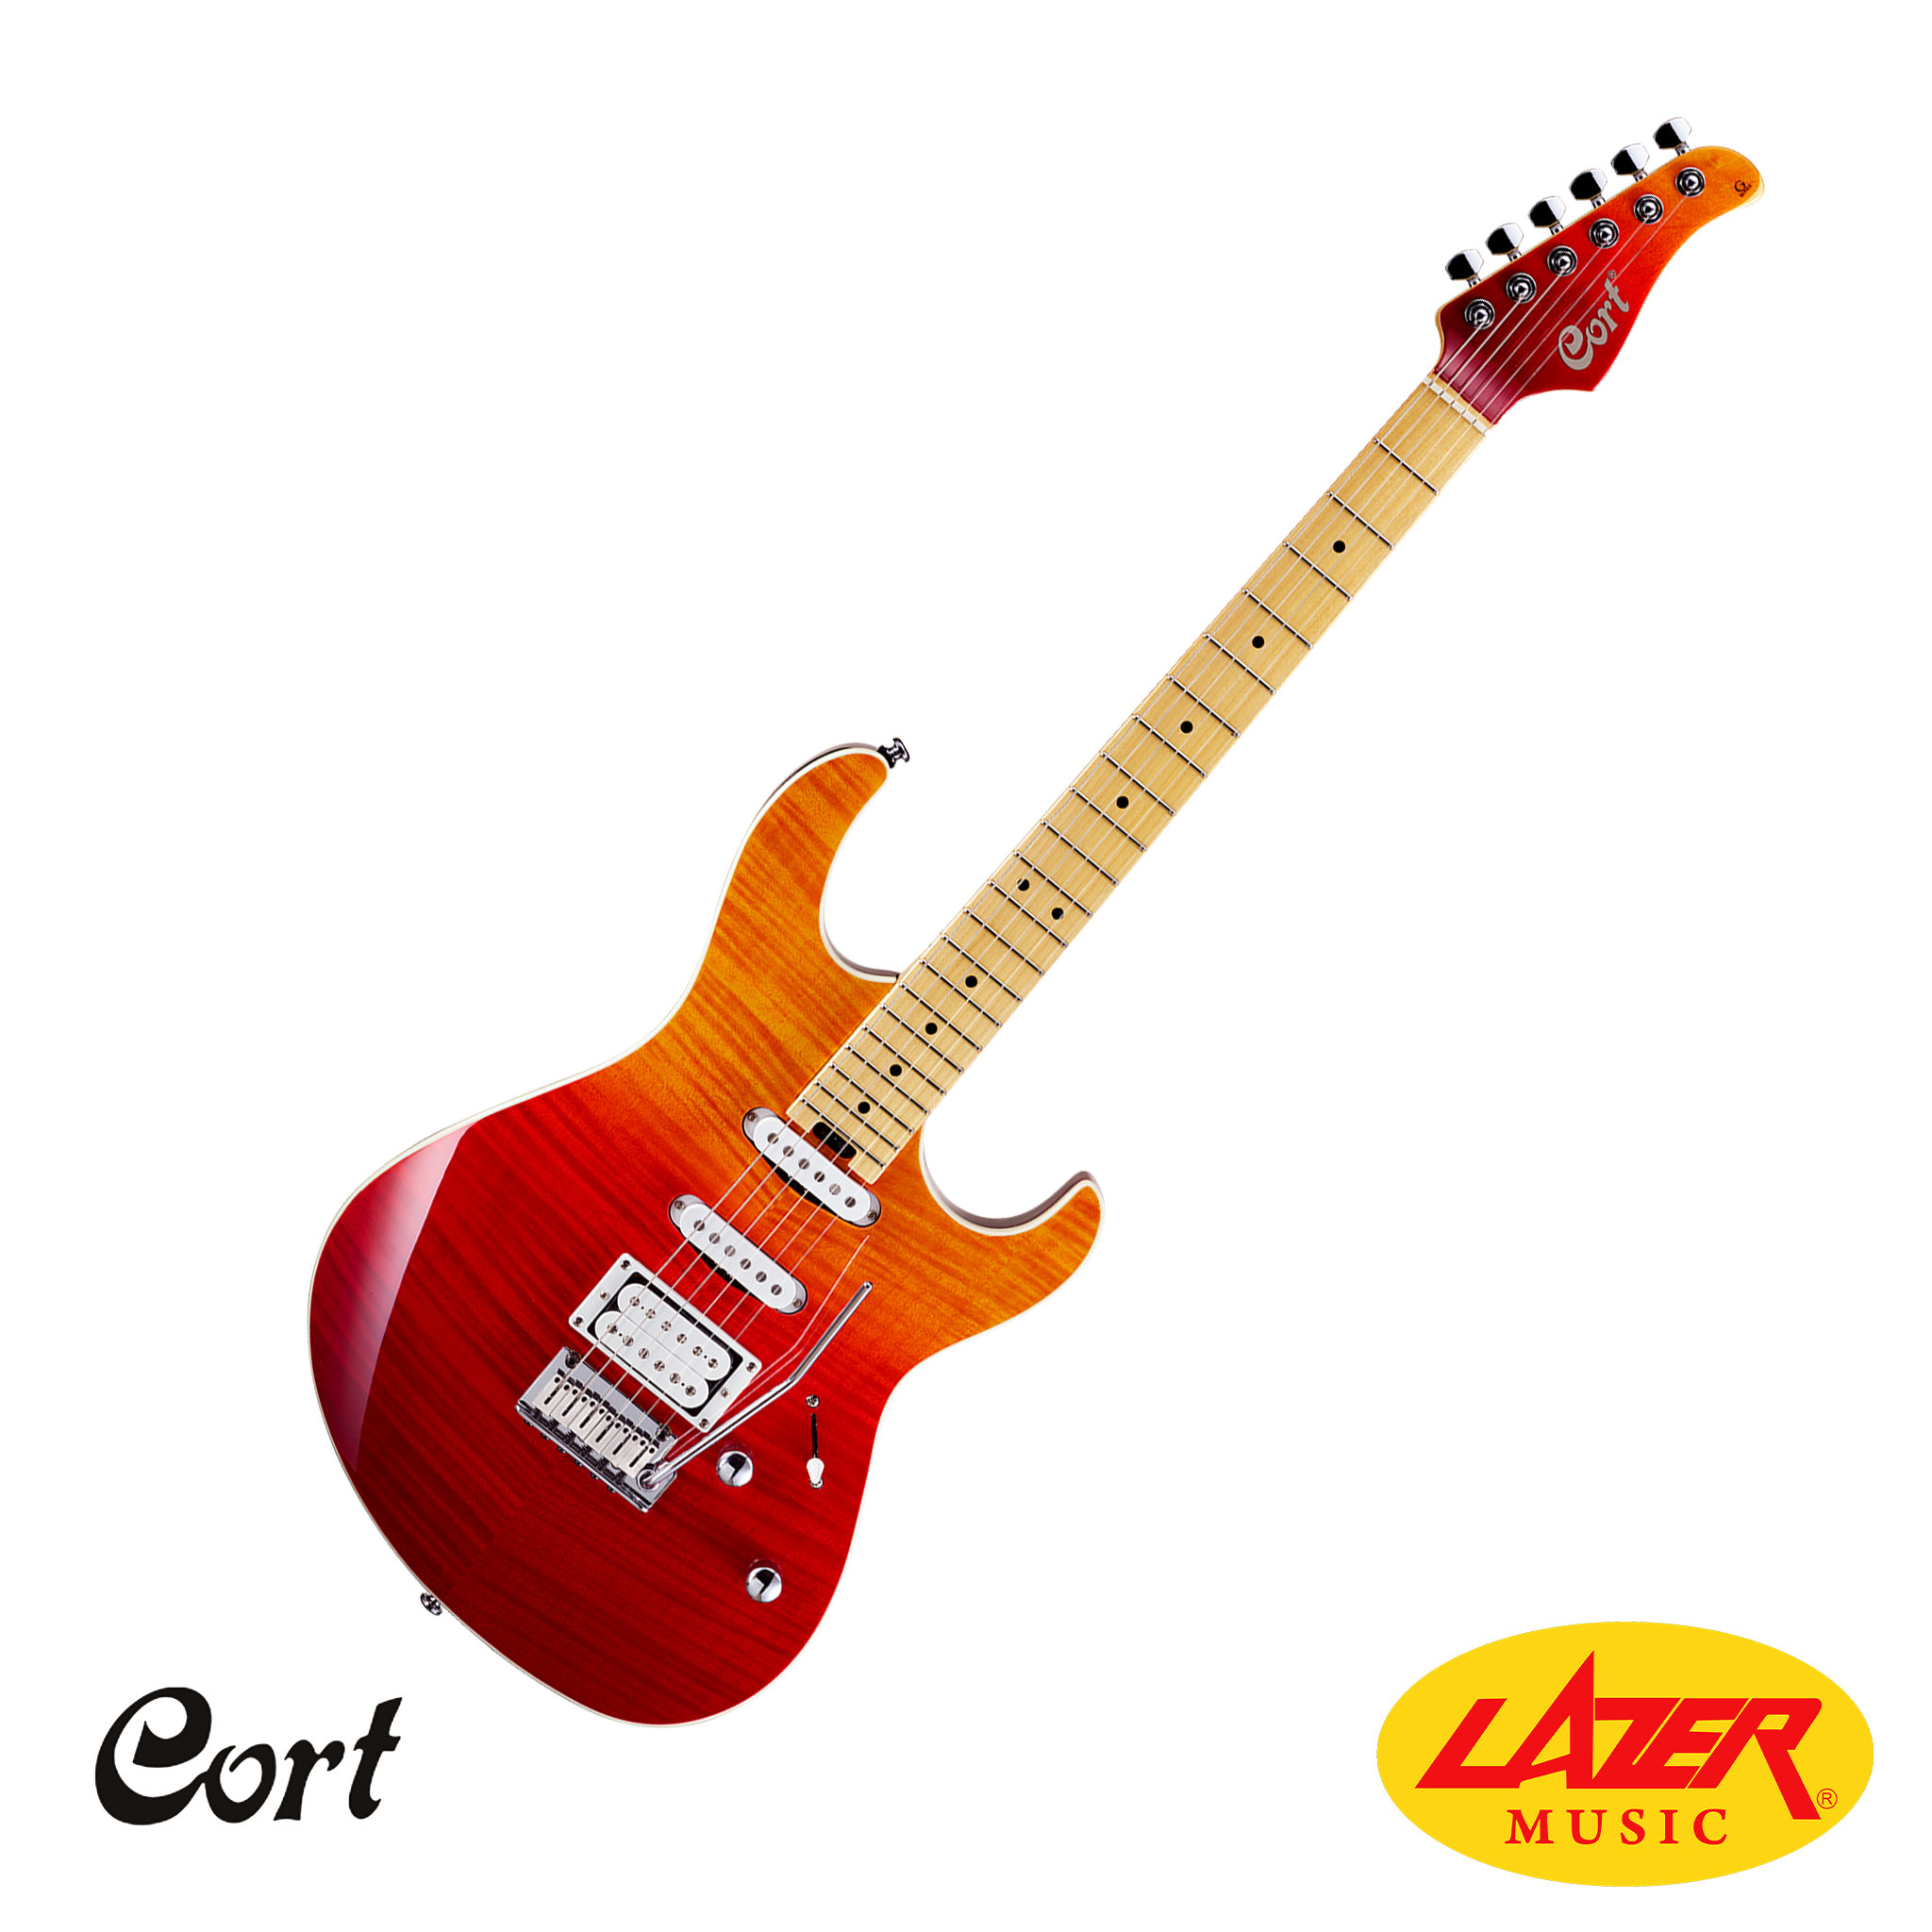 Cort G280DX Alder Body Hard Maple Neck Locking Tuners HSS Electric Guitar With Bag